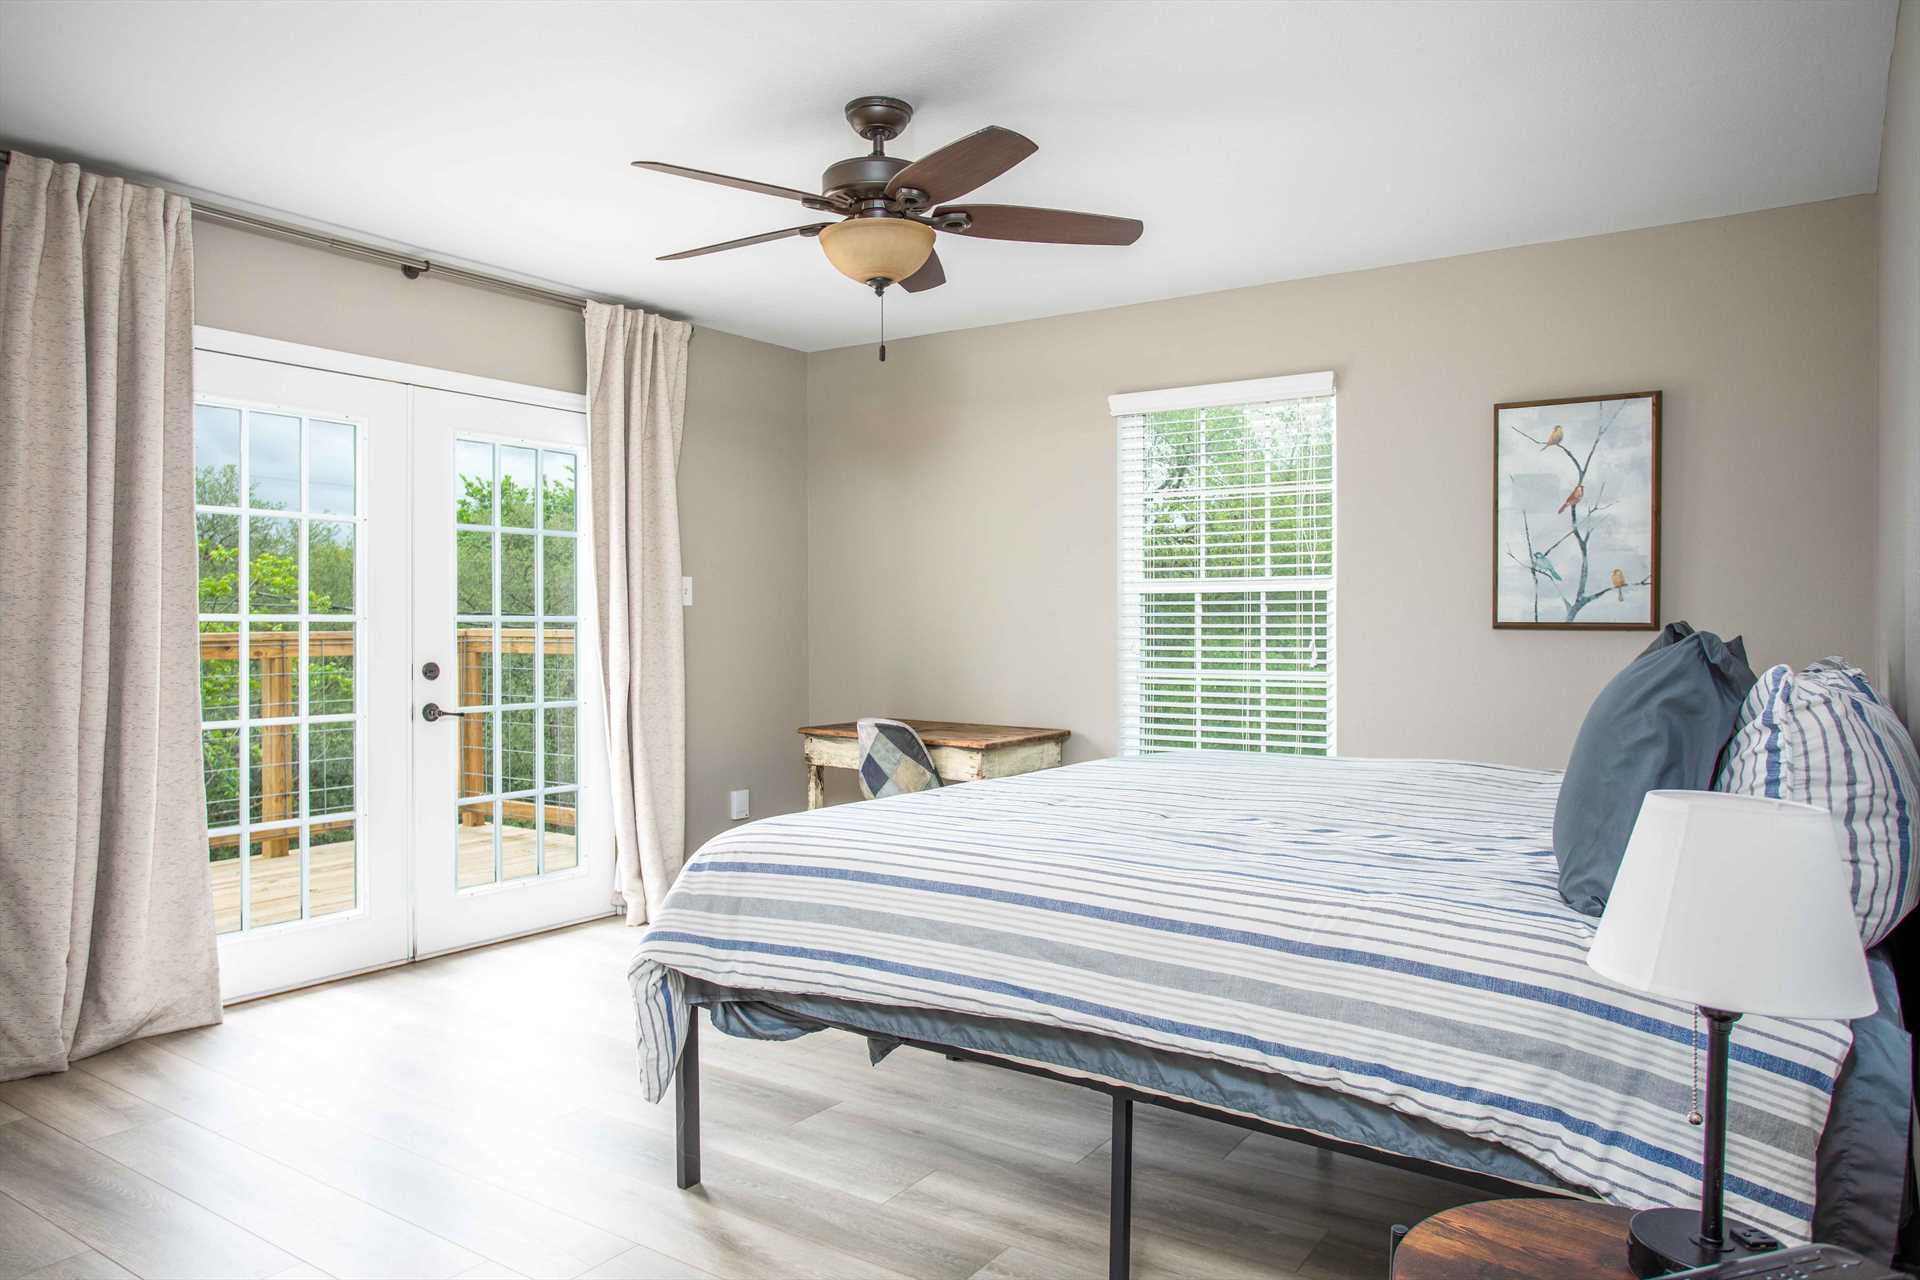                                                 French doors lead from the master bedroom to a private deck! Also featured is a great big king-sized bed.